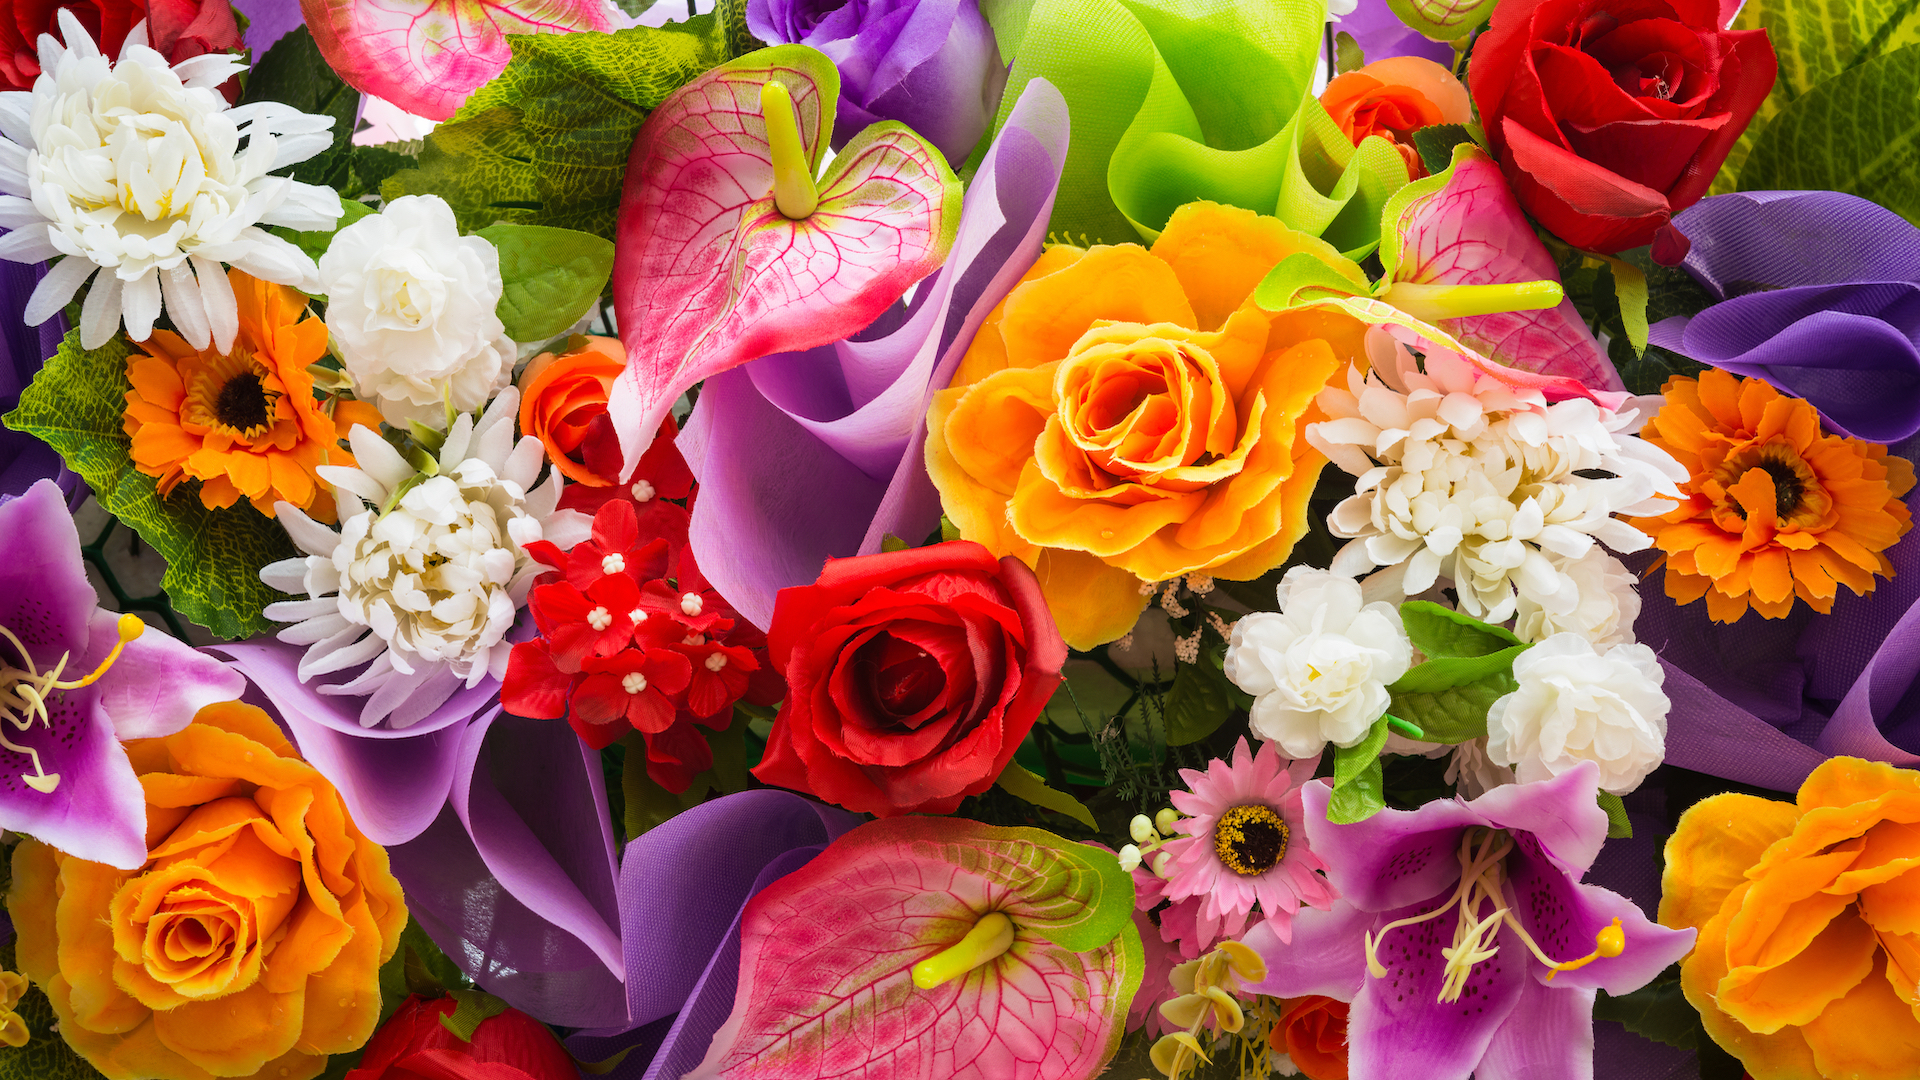 A colourful display of fresh flowers